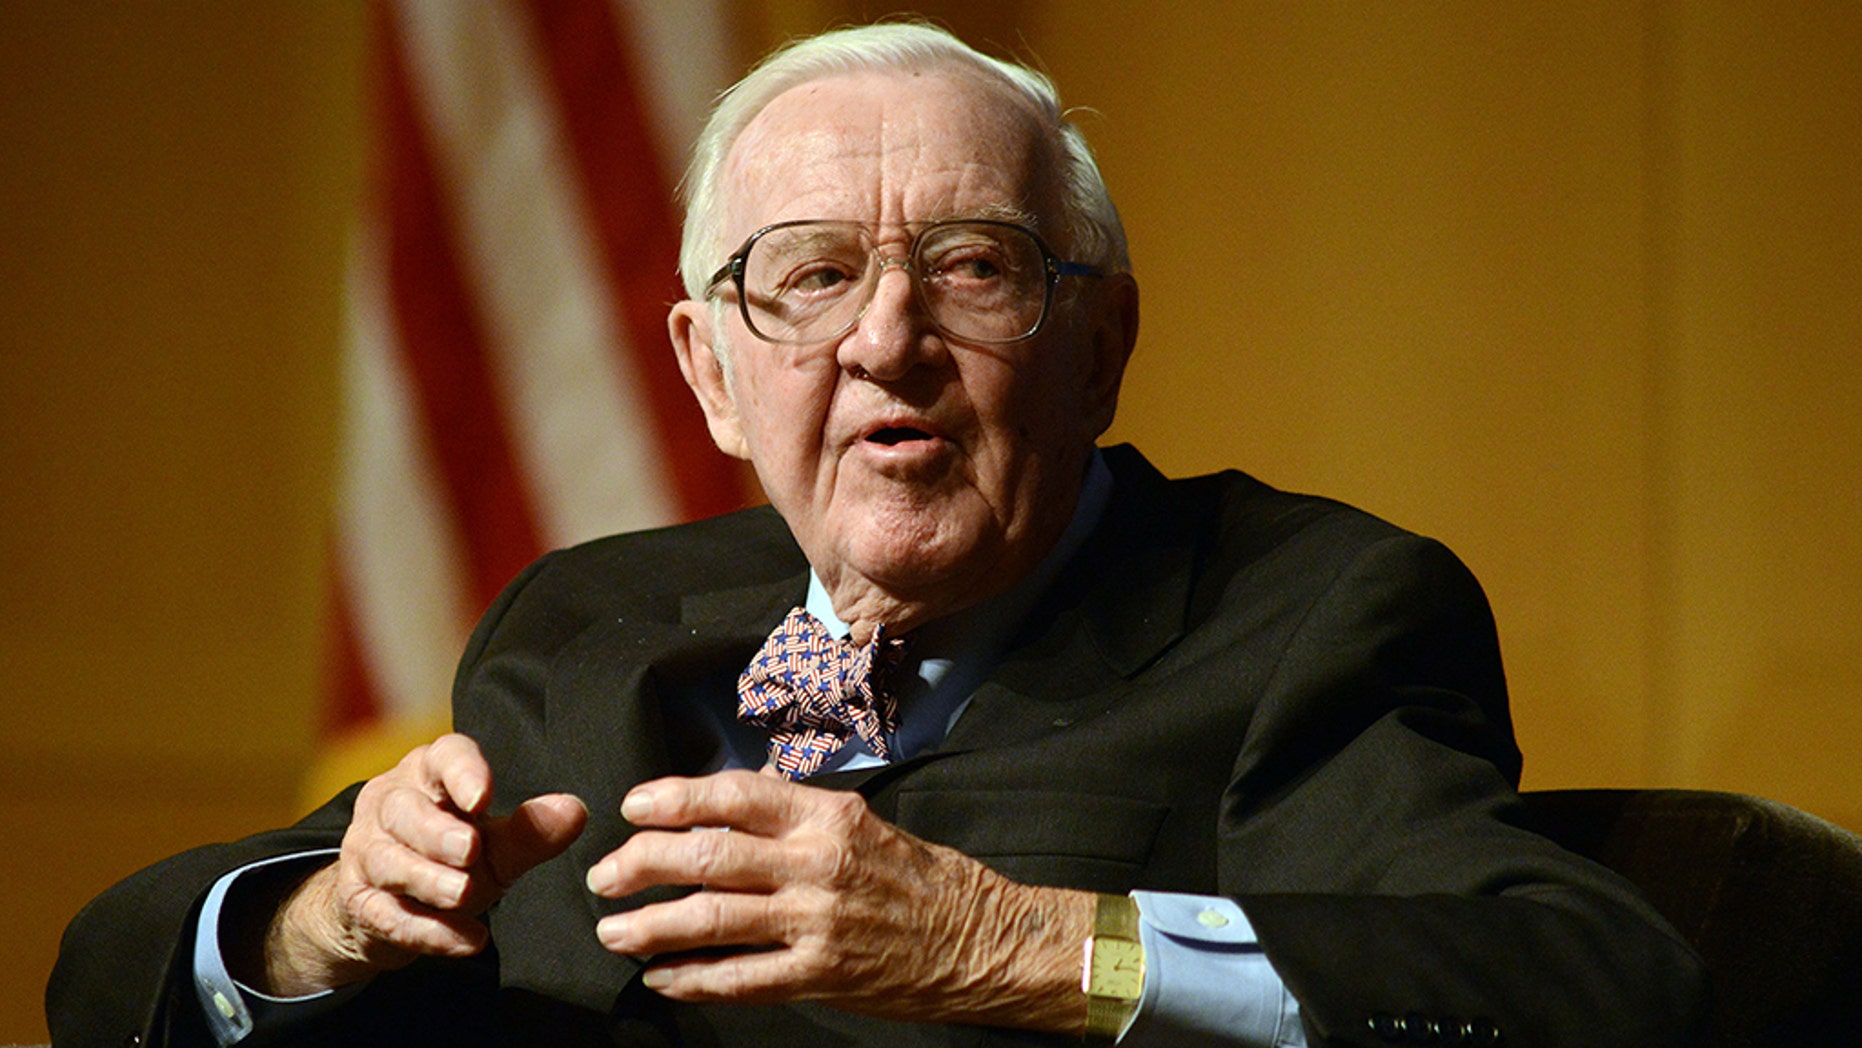 Former Supreme Court Justice John Paul Stevens has revealed in a new book what led to his retirement.